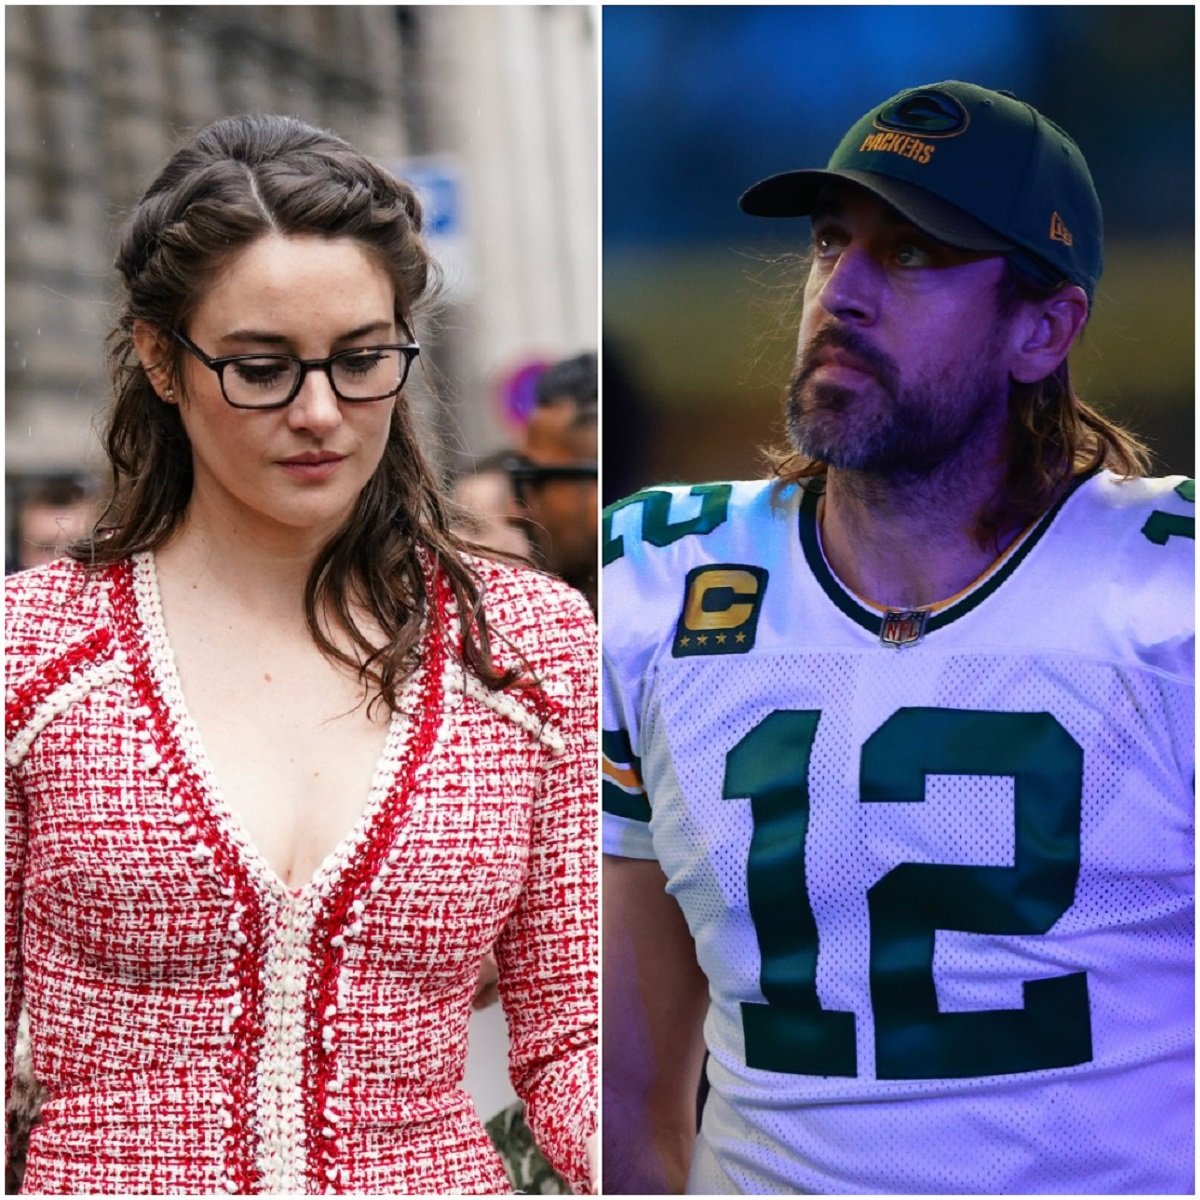 (L): Shailene Woodley looking down at Paris Fashion Week (R): Aaron Rodgers looking on prior to a game against the Detroit Lions